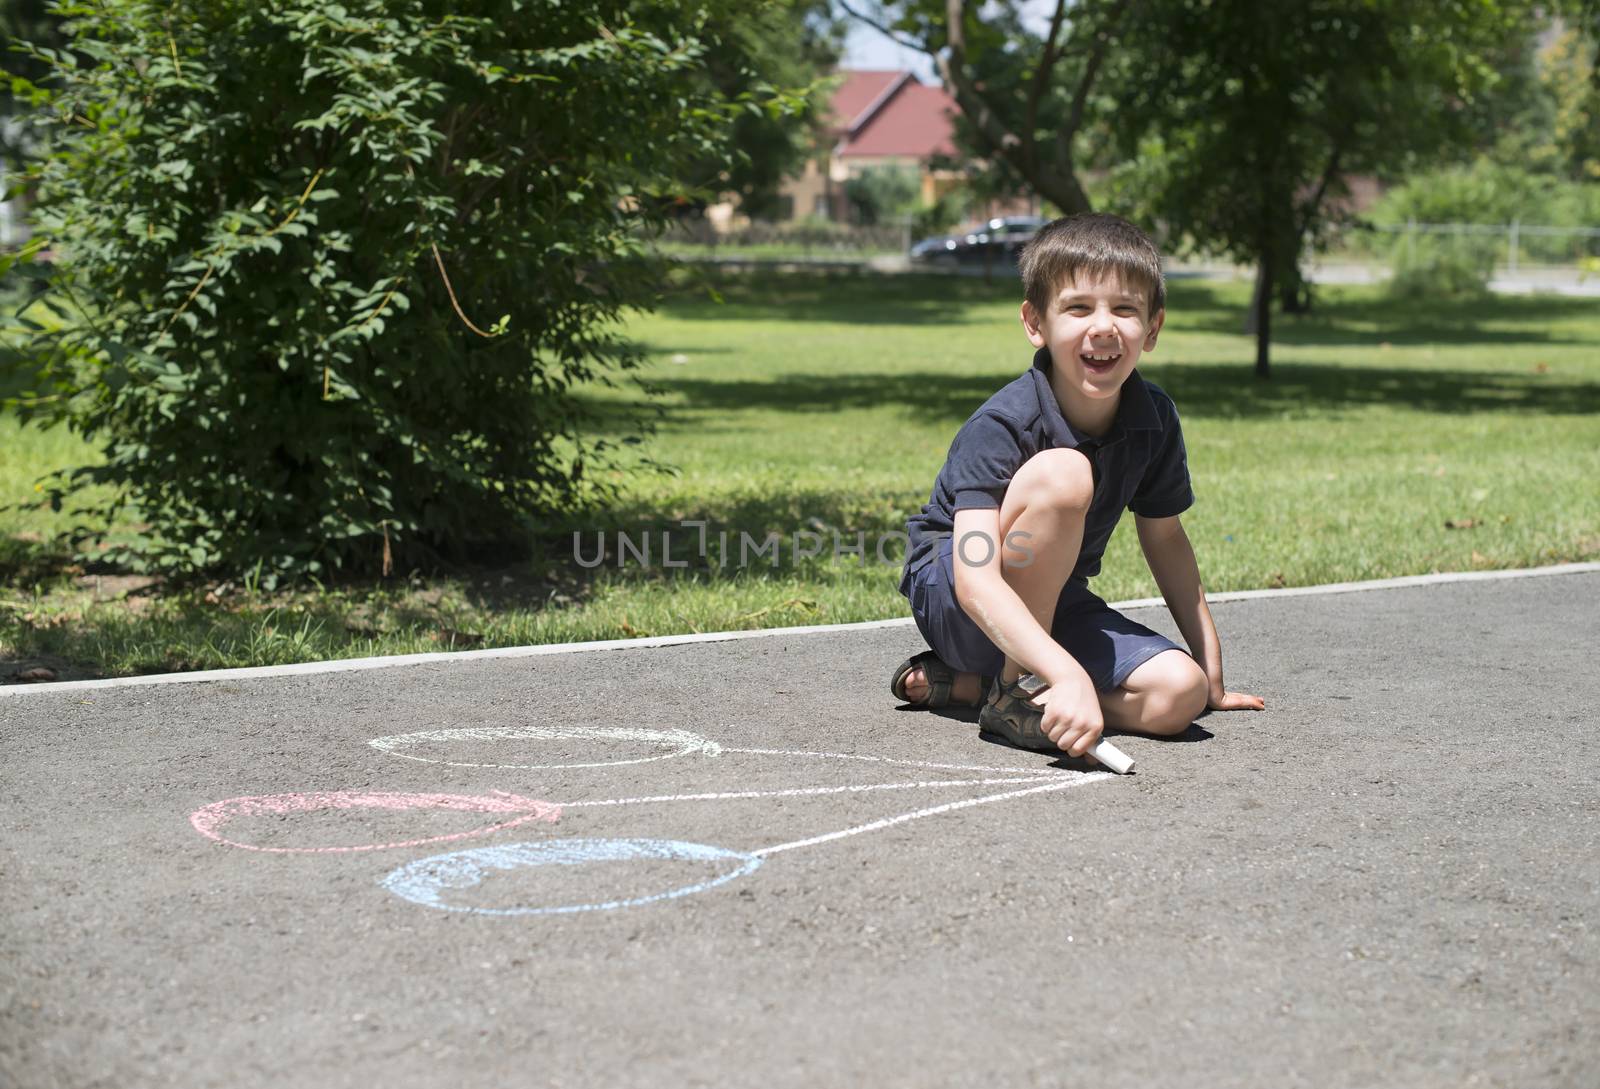 Child drawing balloons on asphalt in a park